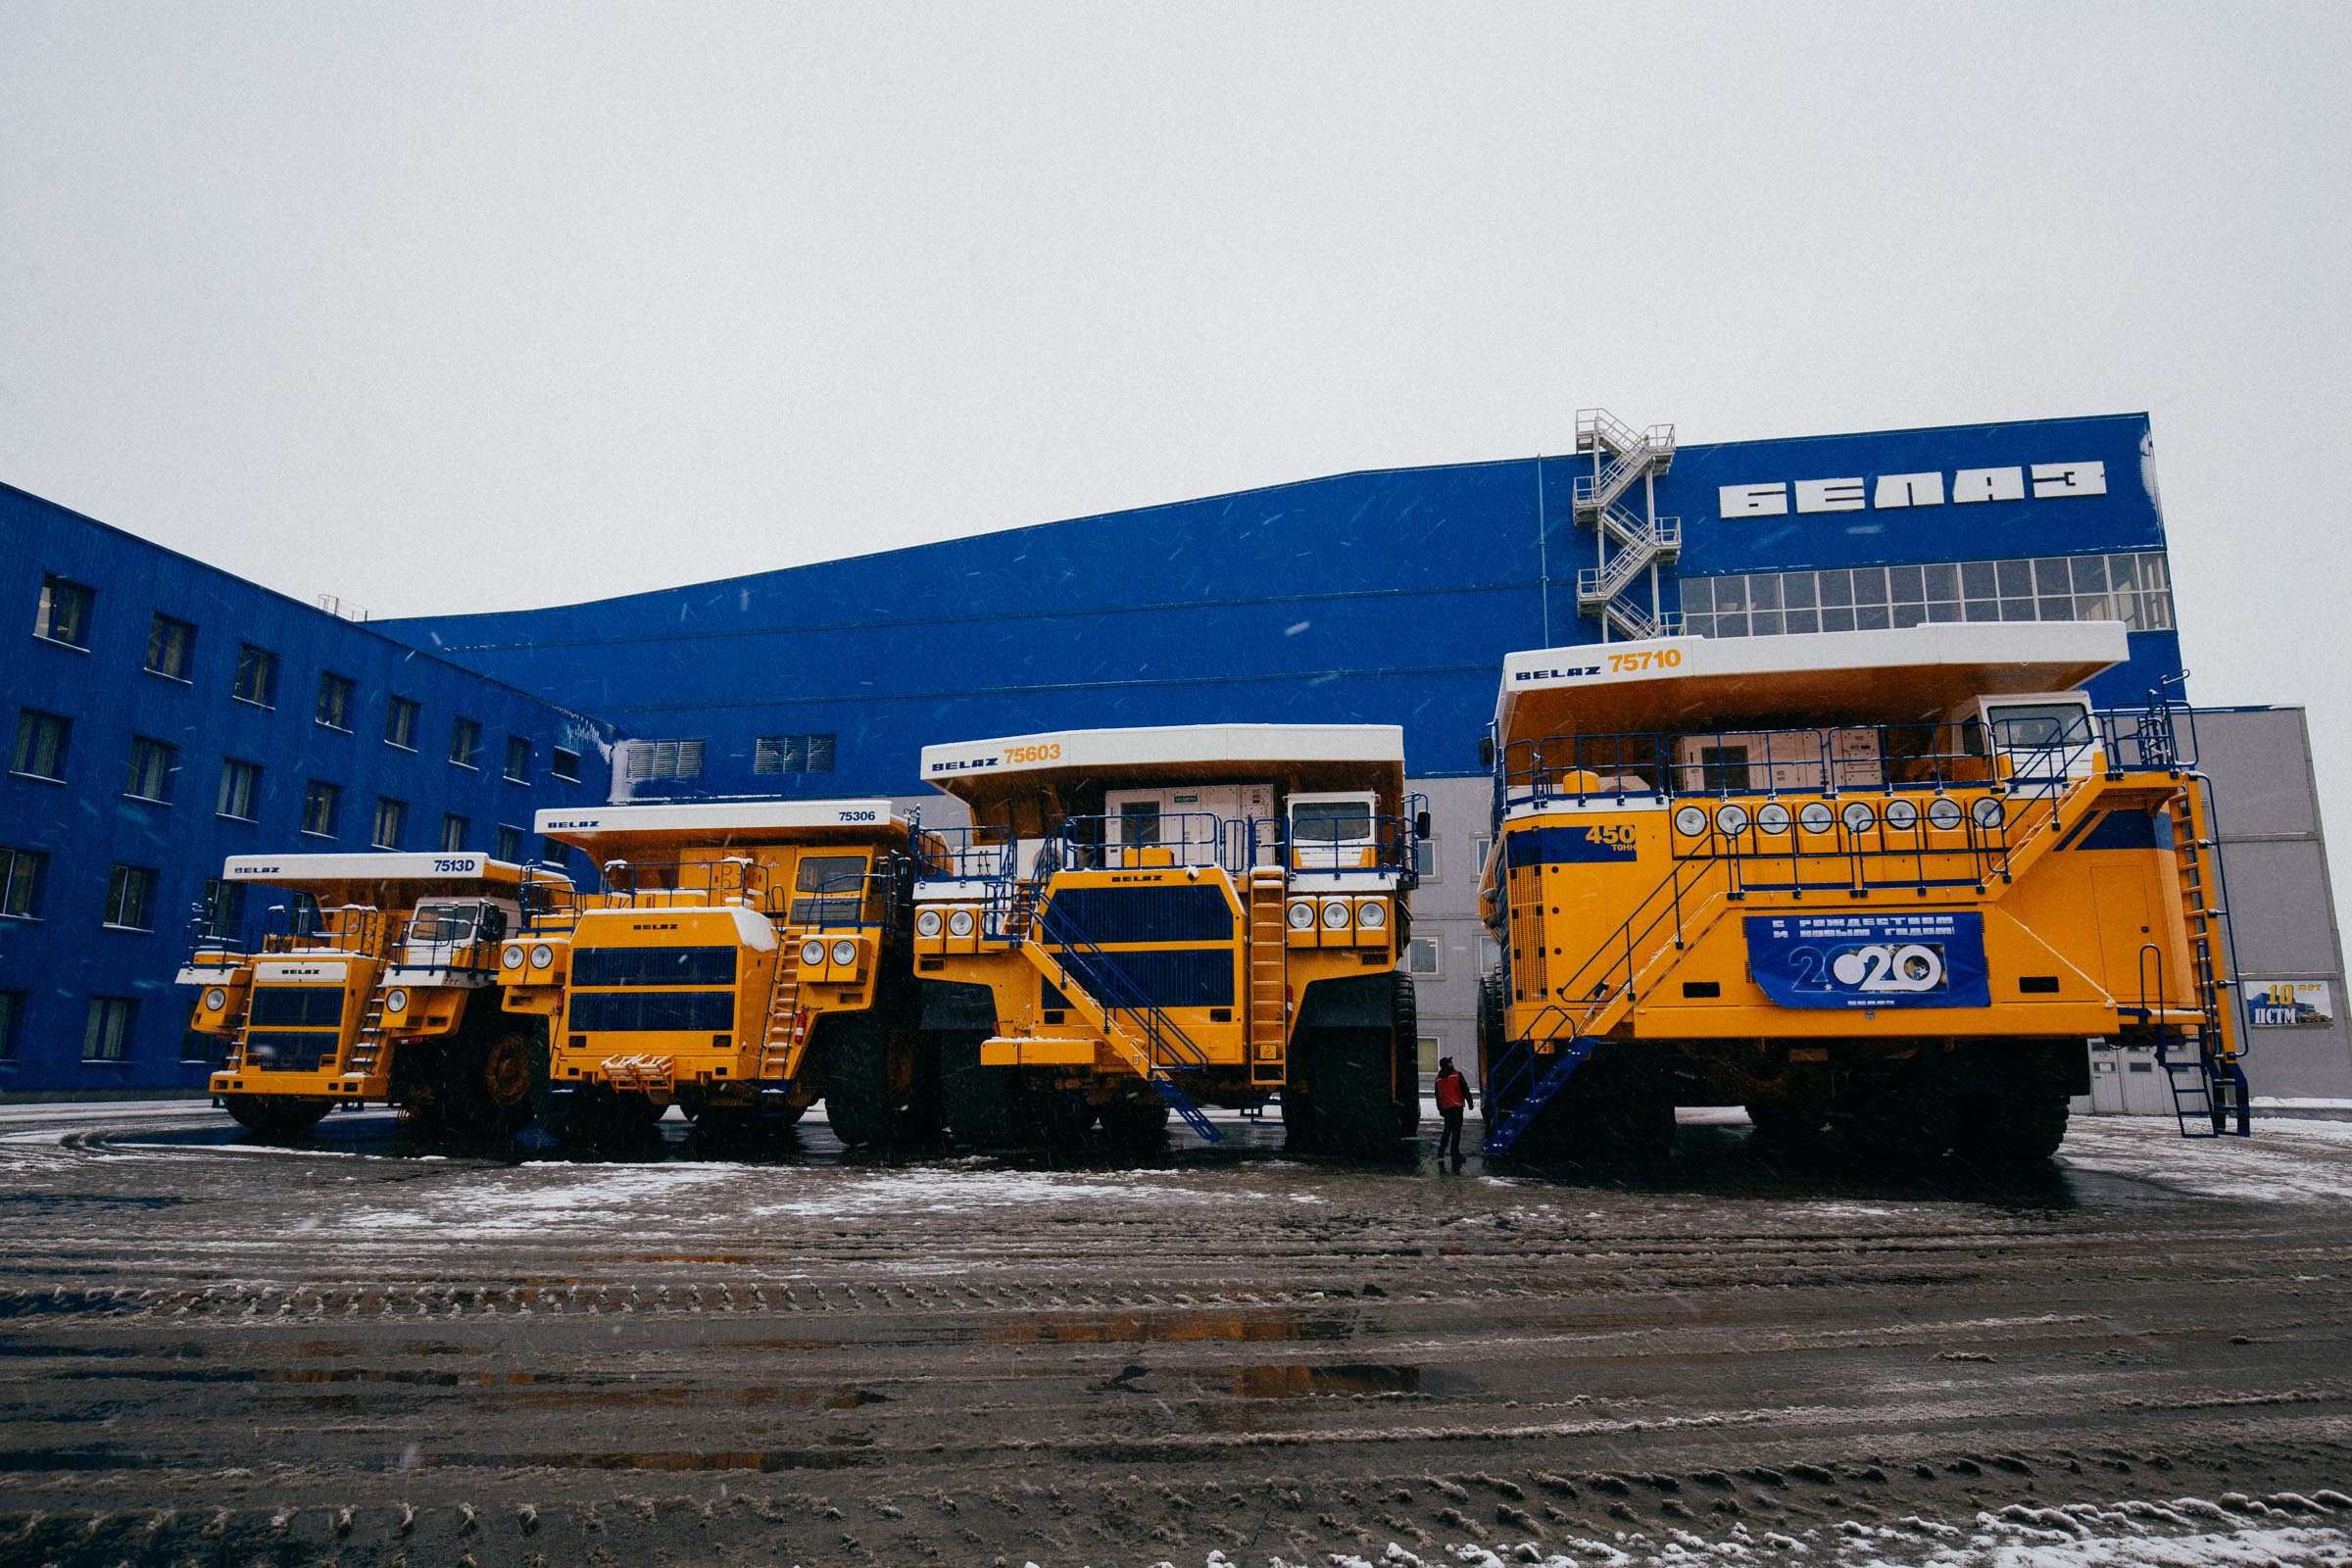 Belaz Tour World S Largest Truck S In Belarus Finland Based Travel Photographer Blog About Best Places To Visit In Europe Engineerontour